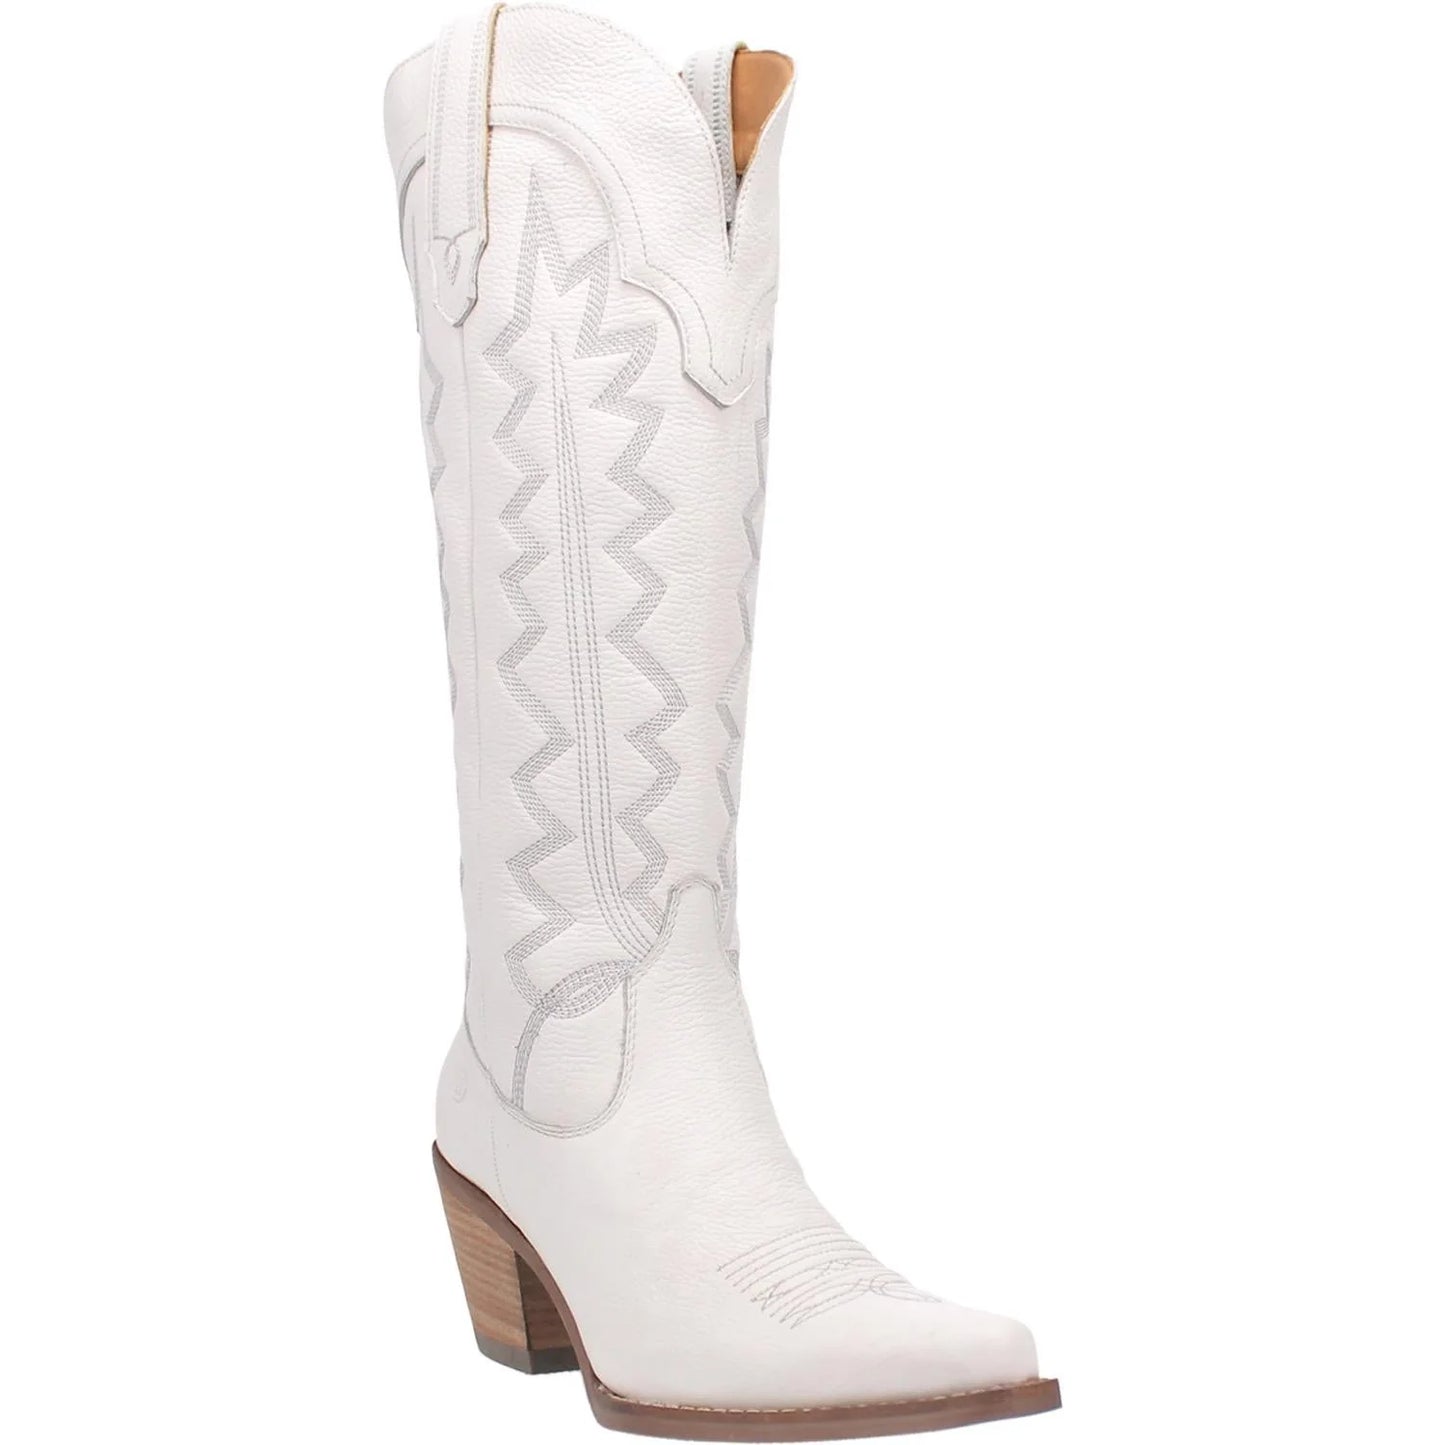 Out West Cowgirl Boots